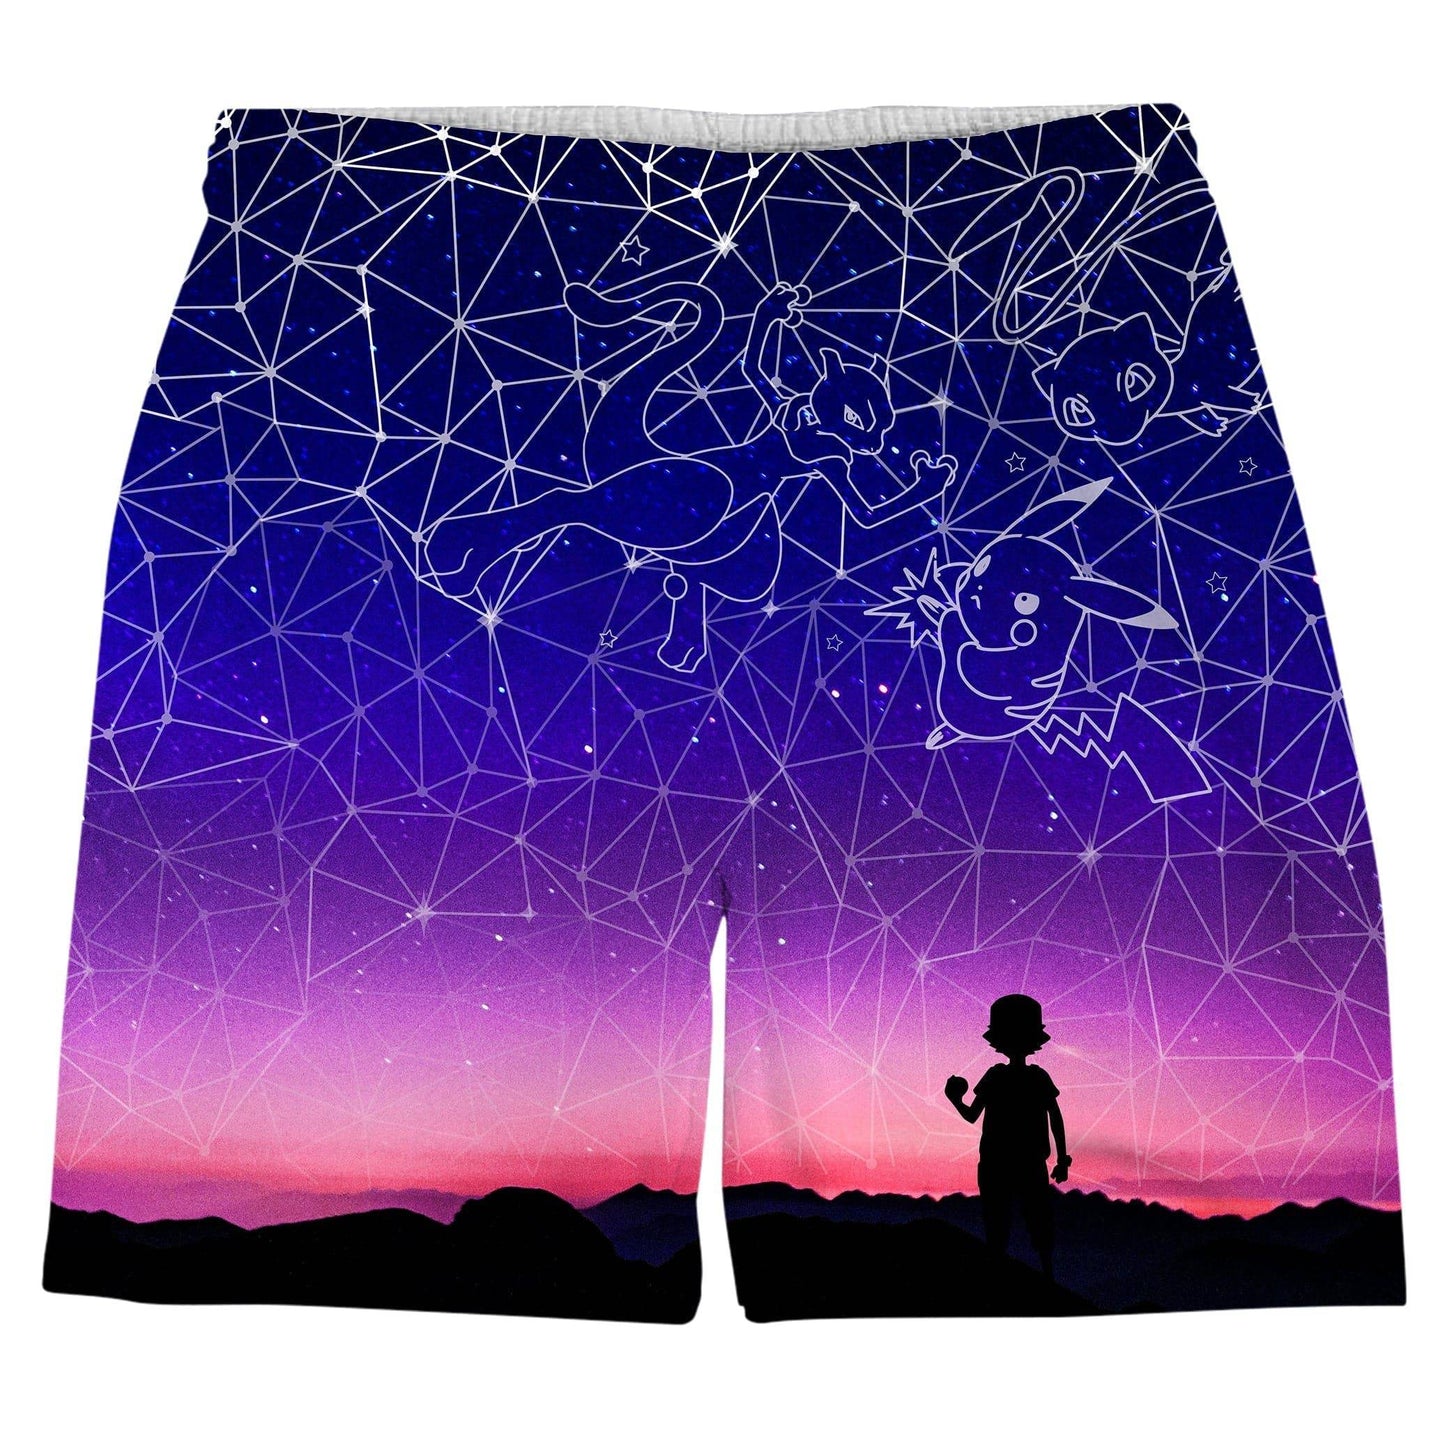 The Very Best Weekend Shorts, Noctum X Truth, | iEDM